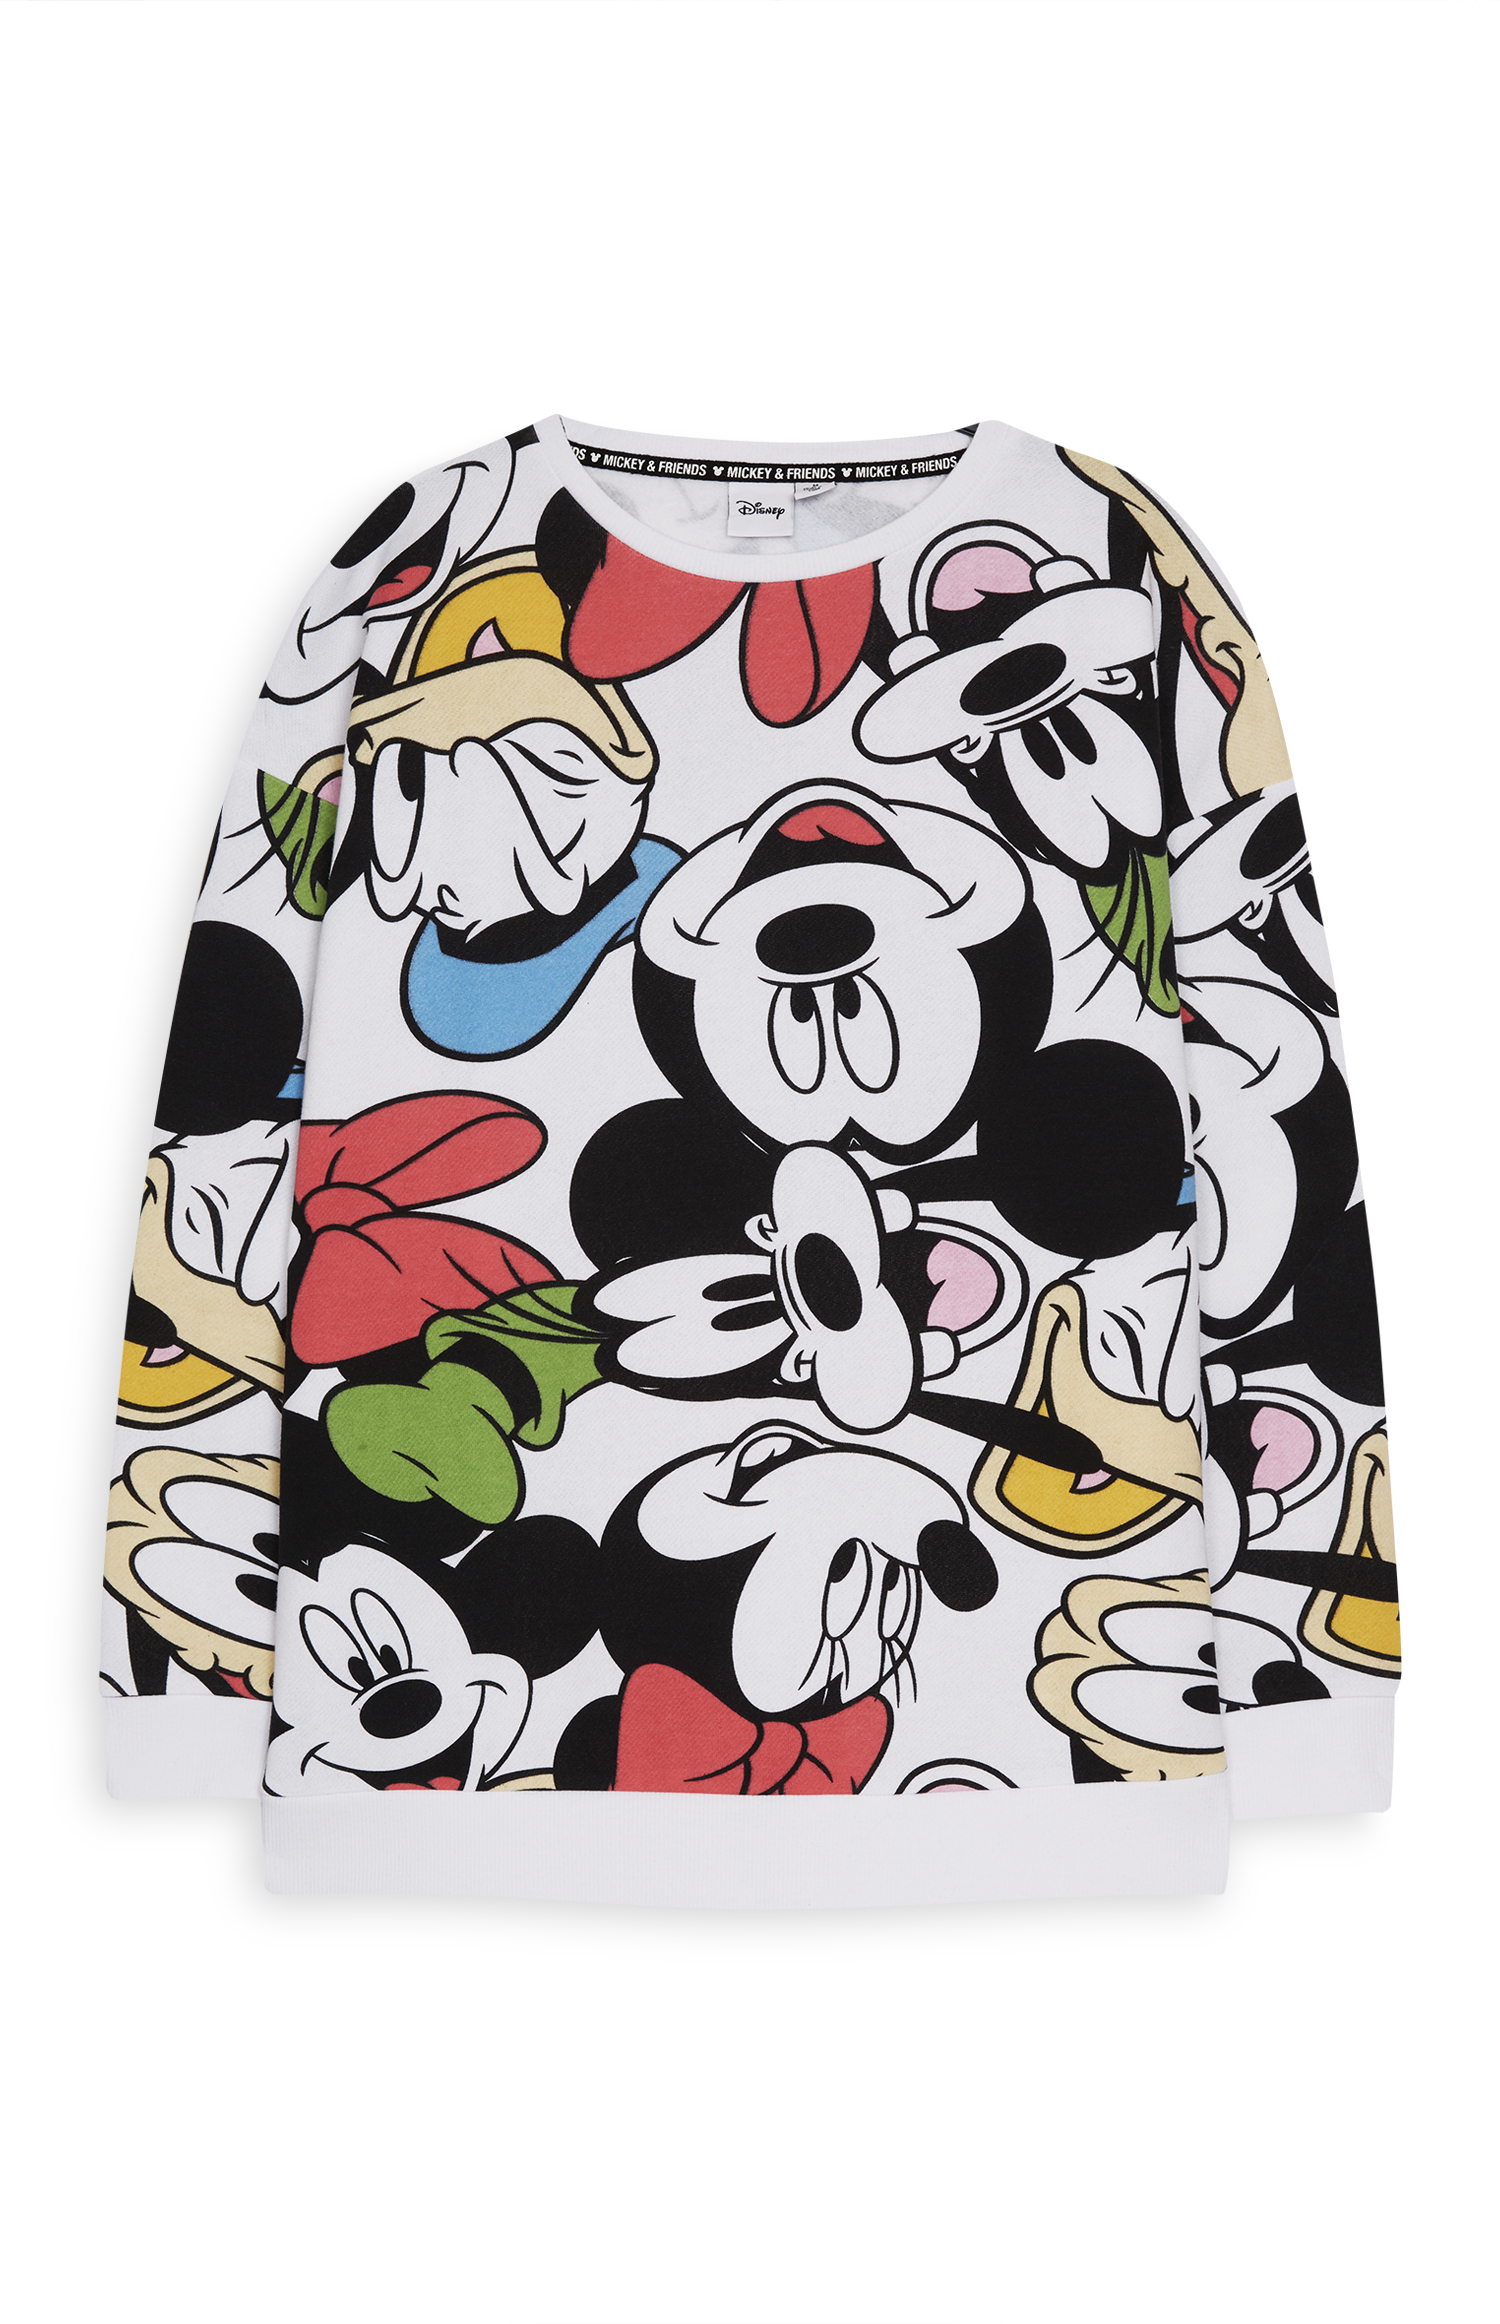 The New Disney Range From Penneys Is Simply Magical | CollegeTimes.com